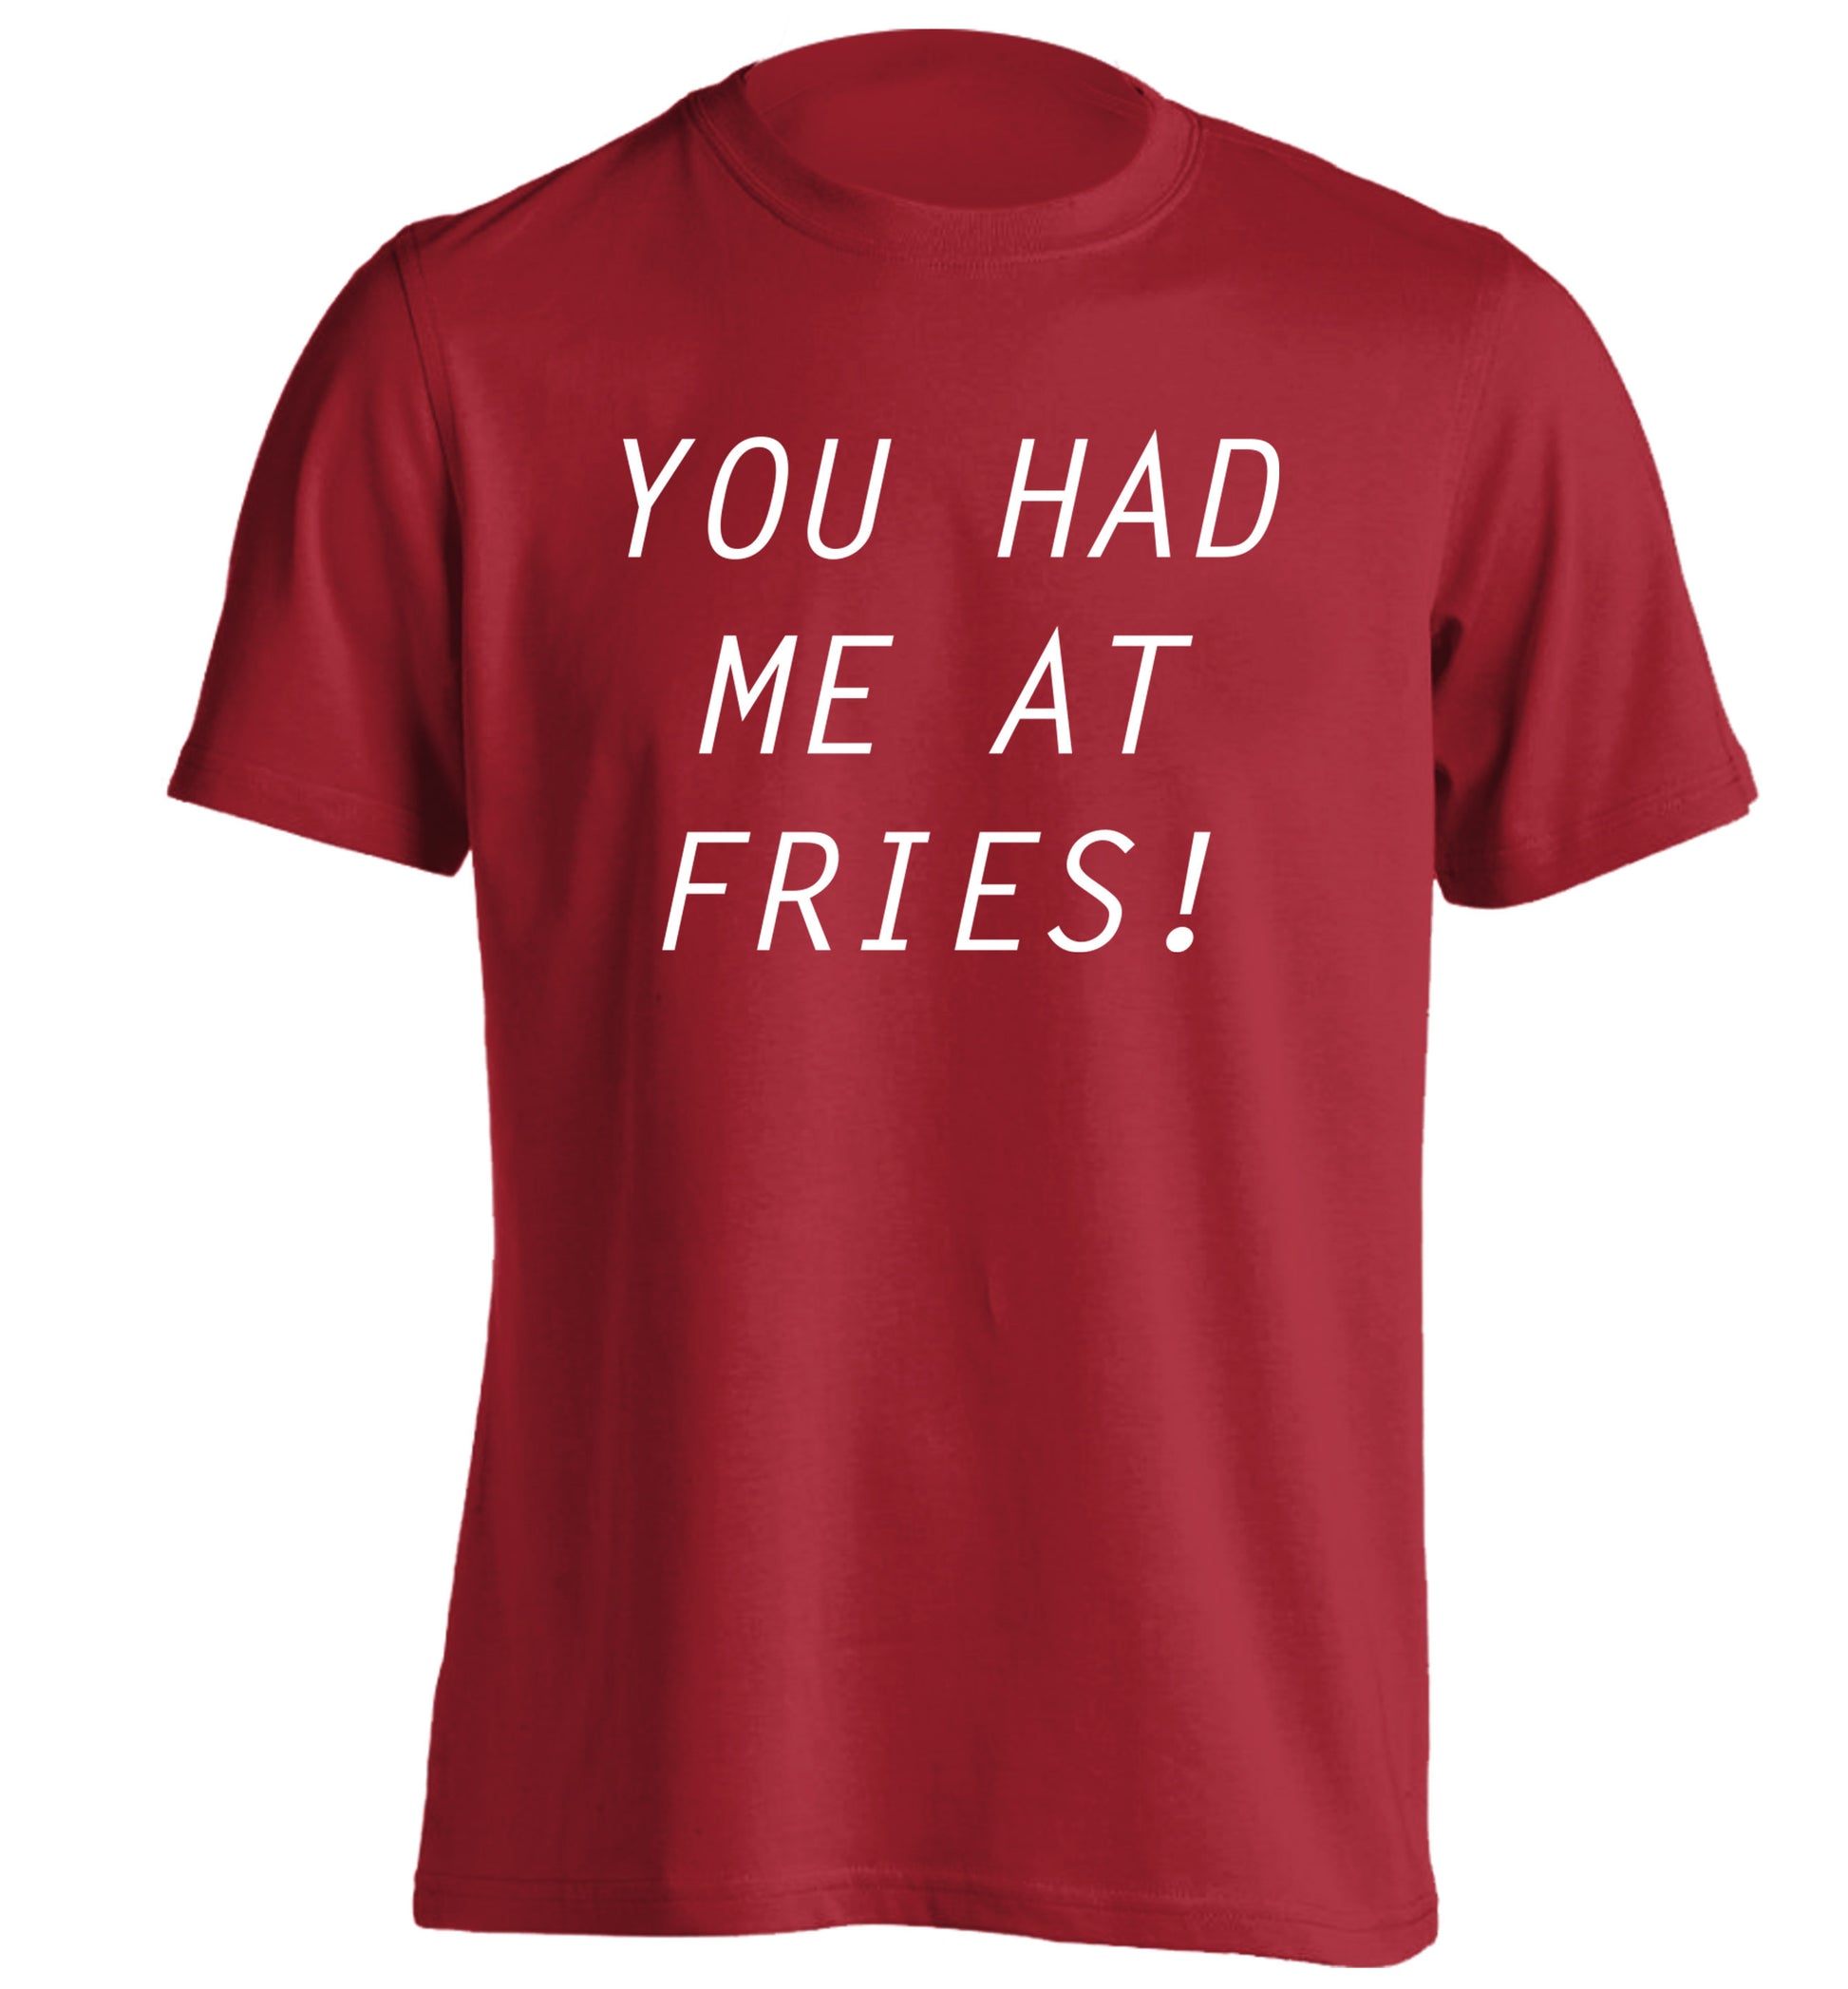 You had me at fries adults unisex red Tshirt 2XL